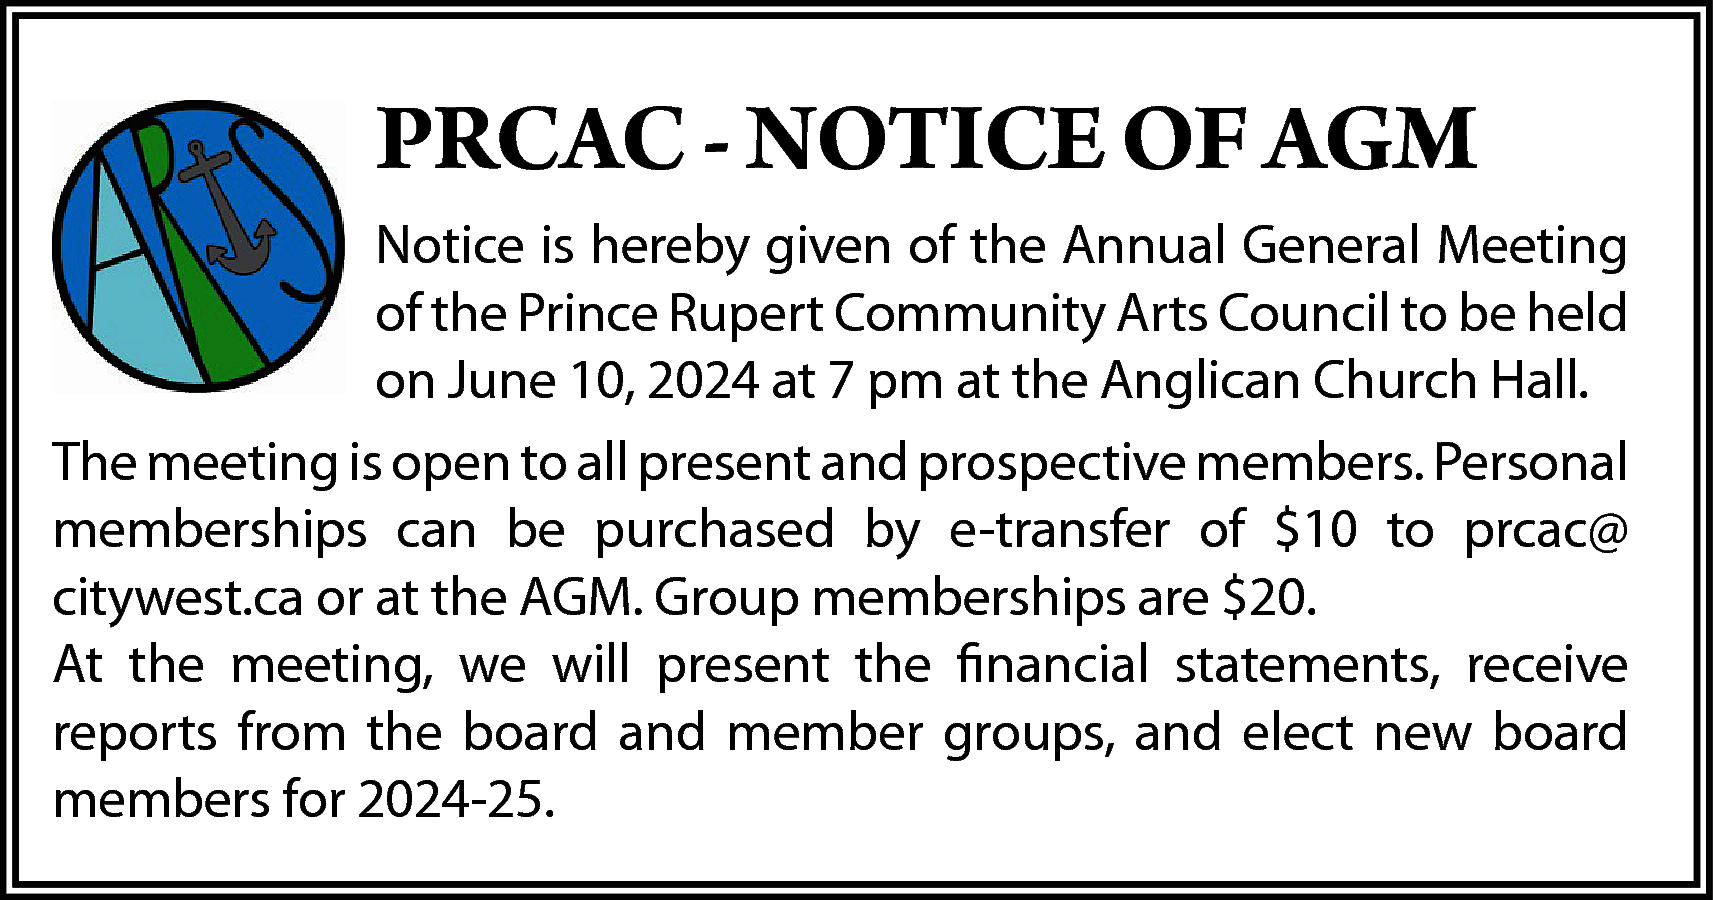 PRCAC - NOTICE OF AGM  PRCAC - NOTICE OF AGM  Notice is hereby given of the Annual General Meeting  of the Prince Rupert Community Arts Council to be held  on June 10, 2024 at 7 pm at the Anglican Church Hall.  The meeting is open to all present and prospective members. Personal  memberships can be purchased by e-transfer of $10 to prcac@  citywest.ca or at the AGM. Group memberships are $20.  At the meeting, we will present the financial statements, receive  reports from the board and member groups, and elect new board  members for 2024-25.    